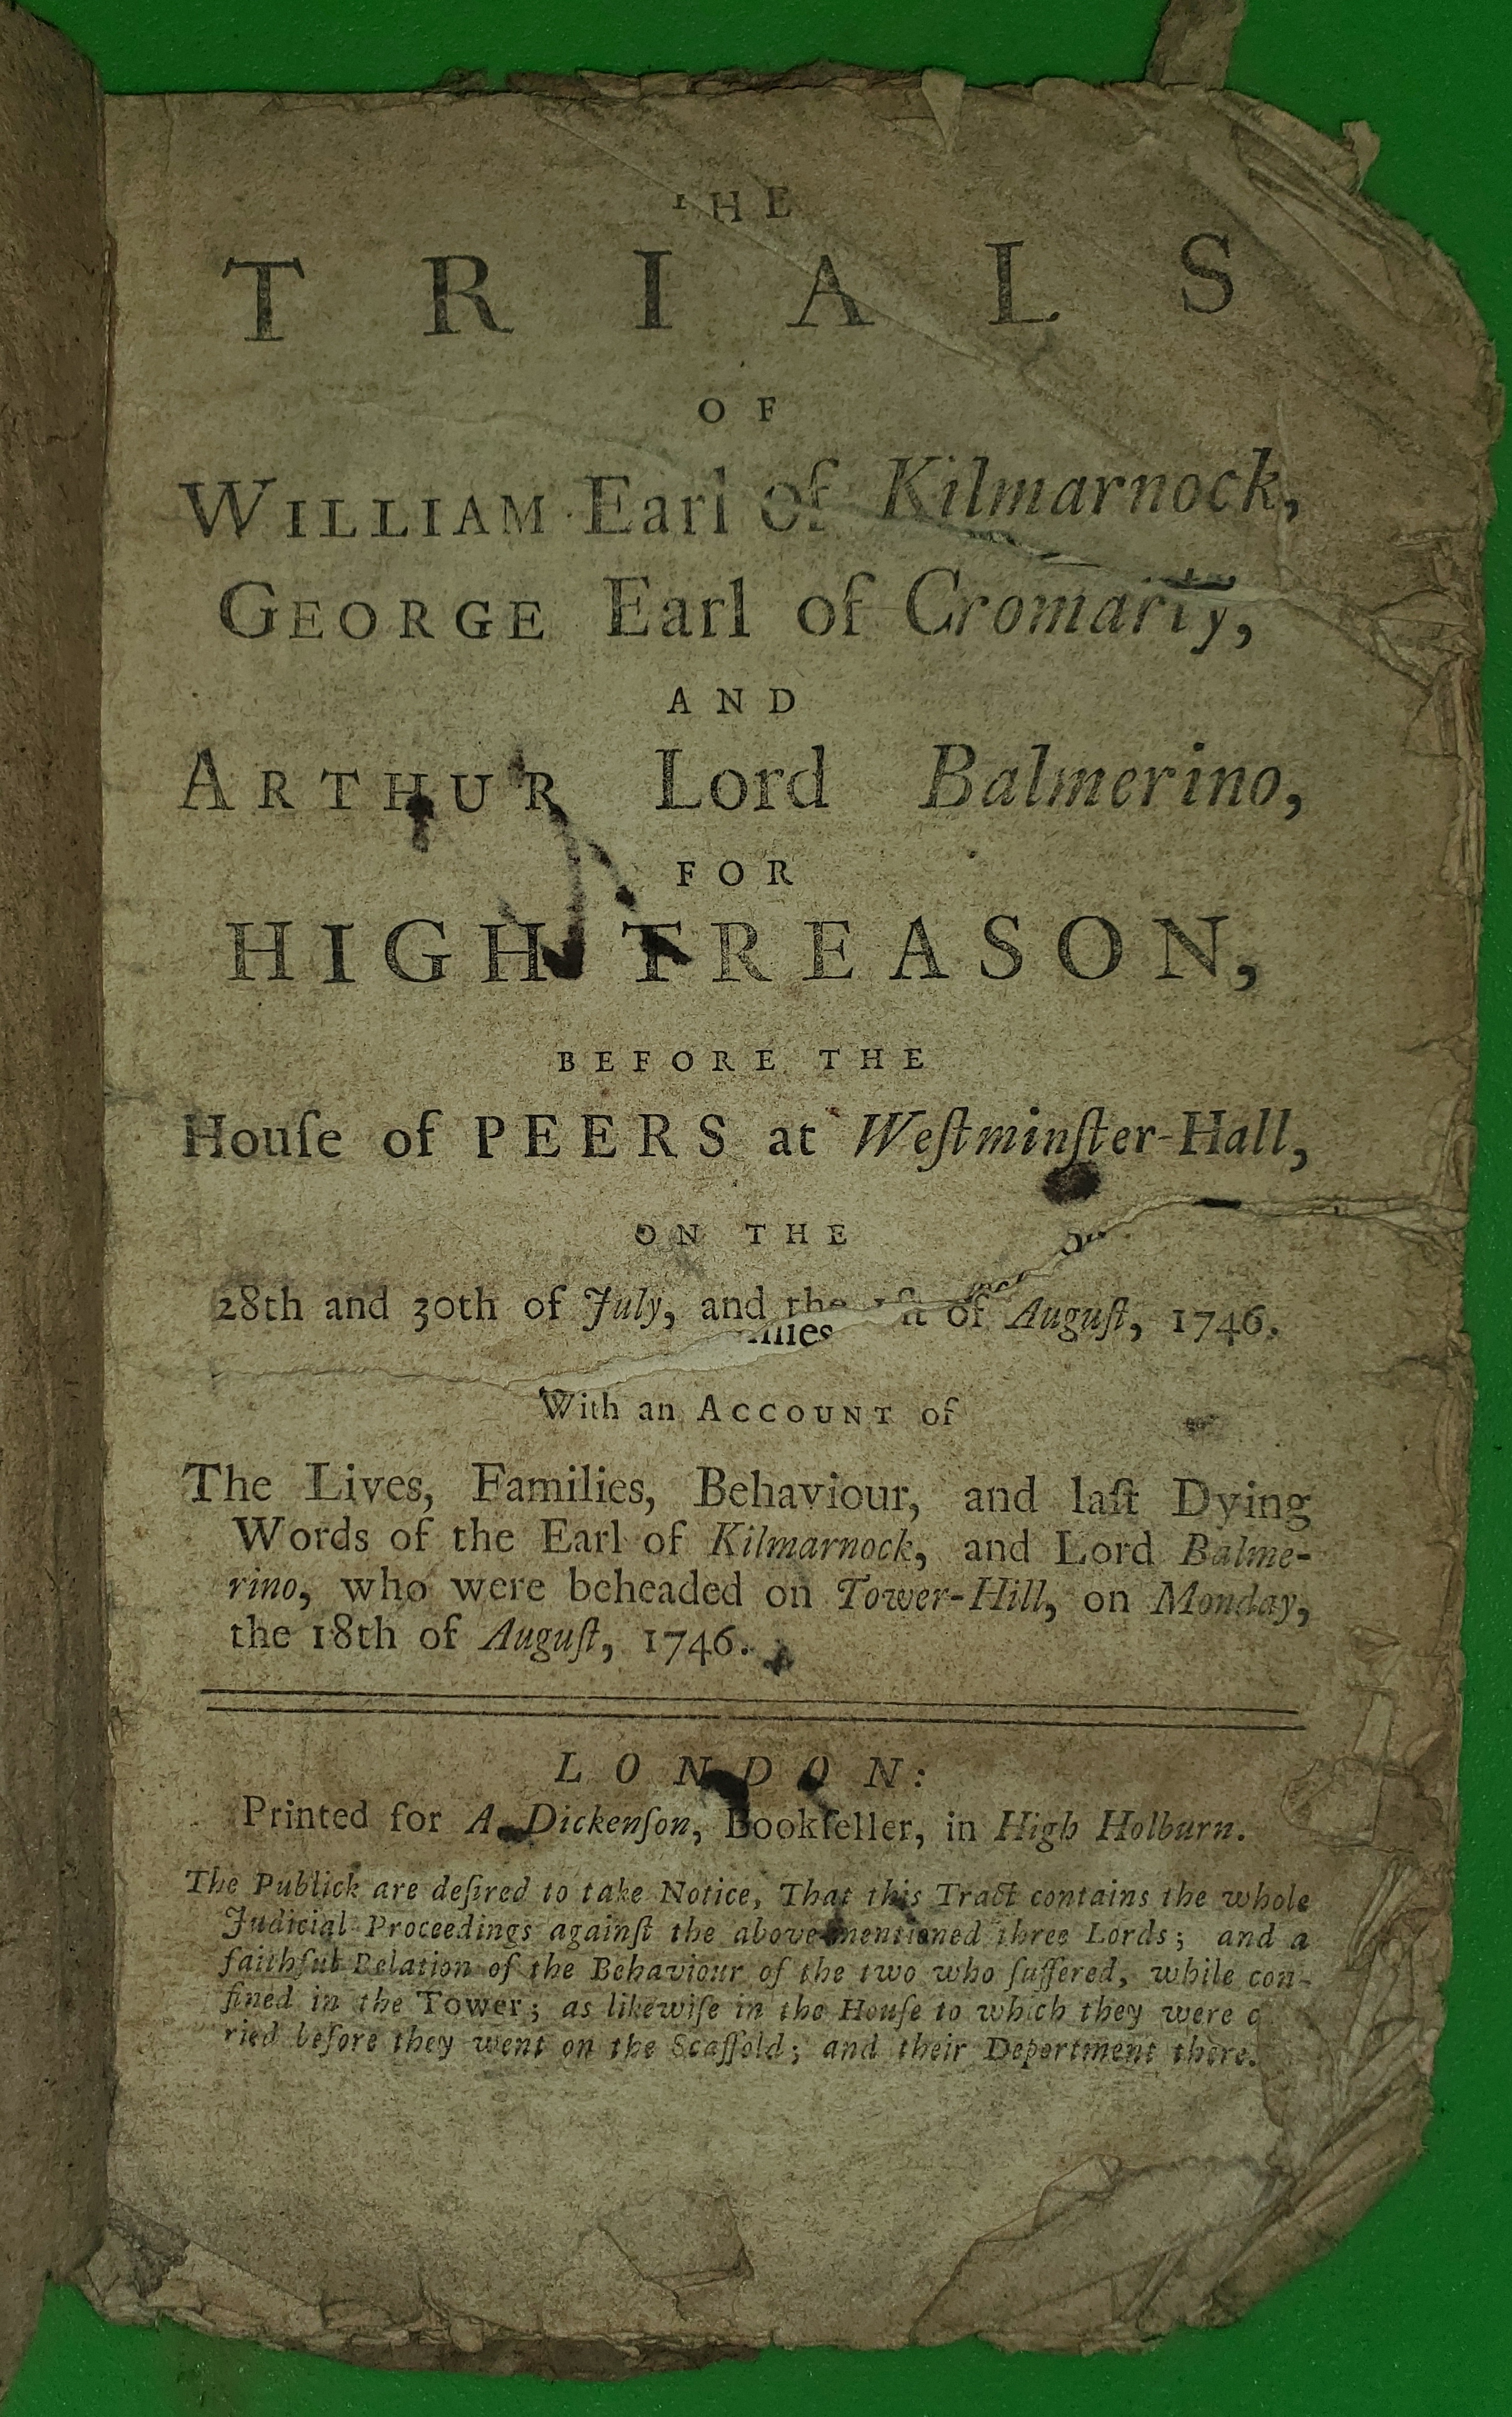 Image for The trials of William Earl of Kilmarnock, George Earl of Cromartie and Arthur Lord Balmerino for high treason:  before the House of Peers, at Westminster Hall, on the 28th and 30th of July and the first of August, 1746 : with an account of the lives, families, behaviour, and last dying words of the Earl of Kilmarnock and Lord Balmerino, who were beheaded on Tower-H